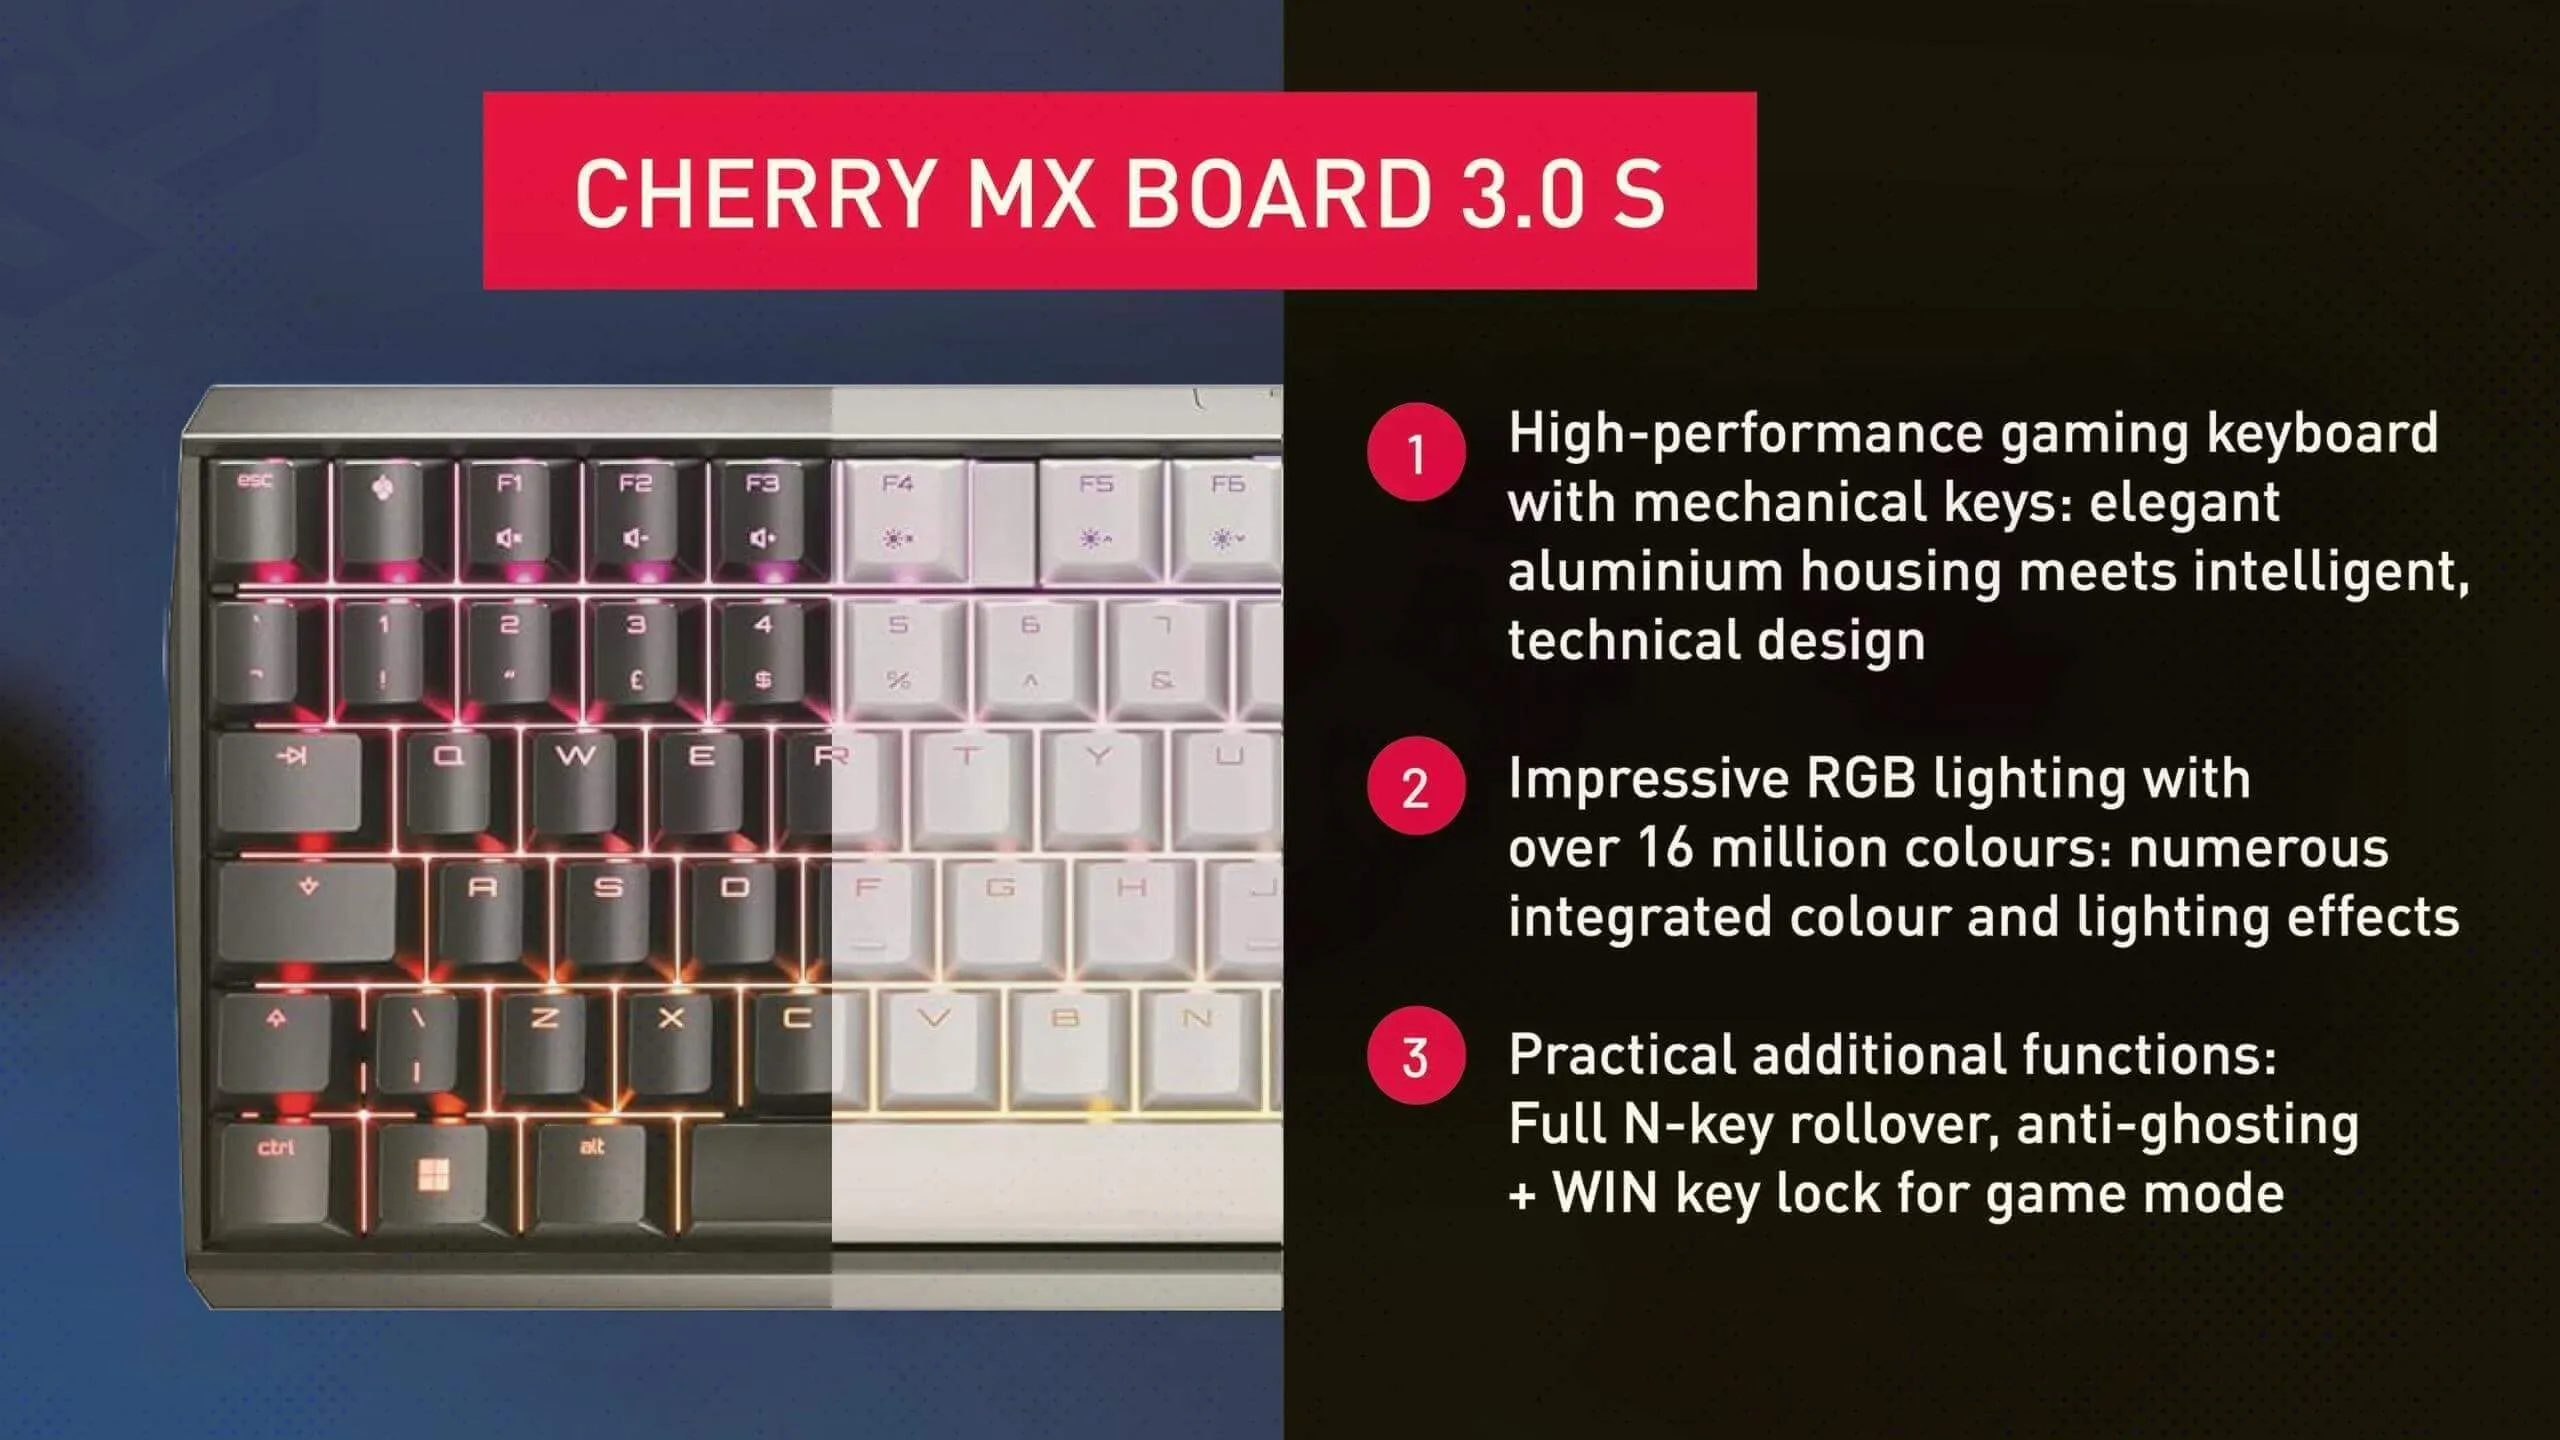 CHERRY MX 3.0S additional features